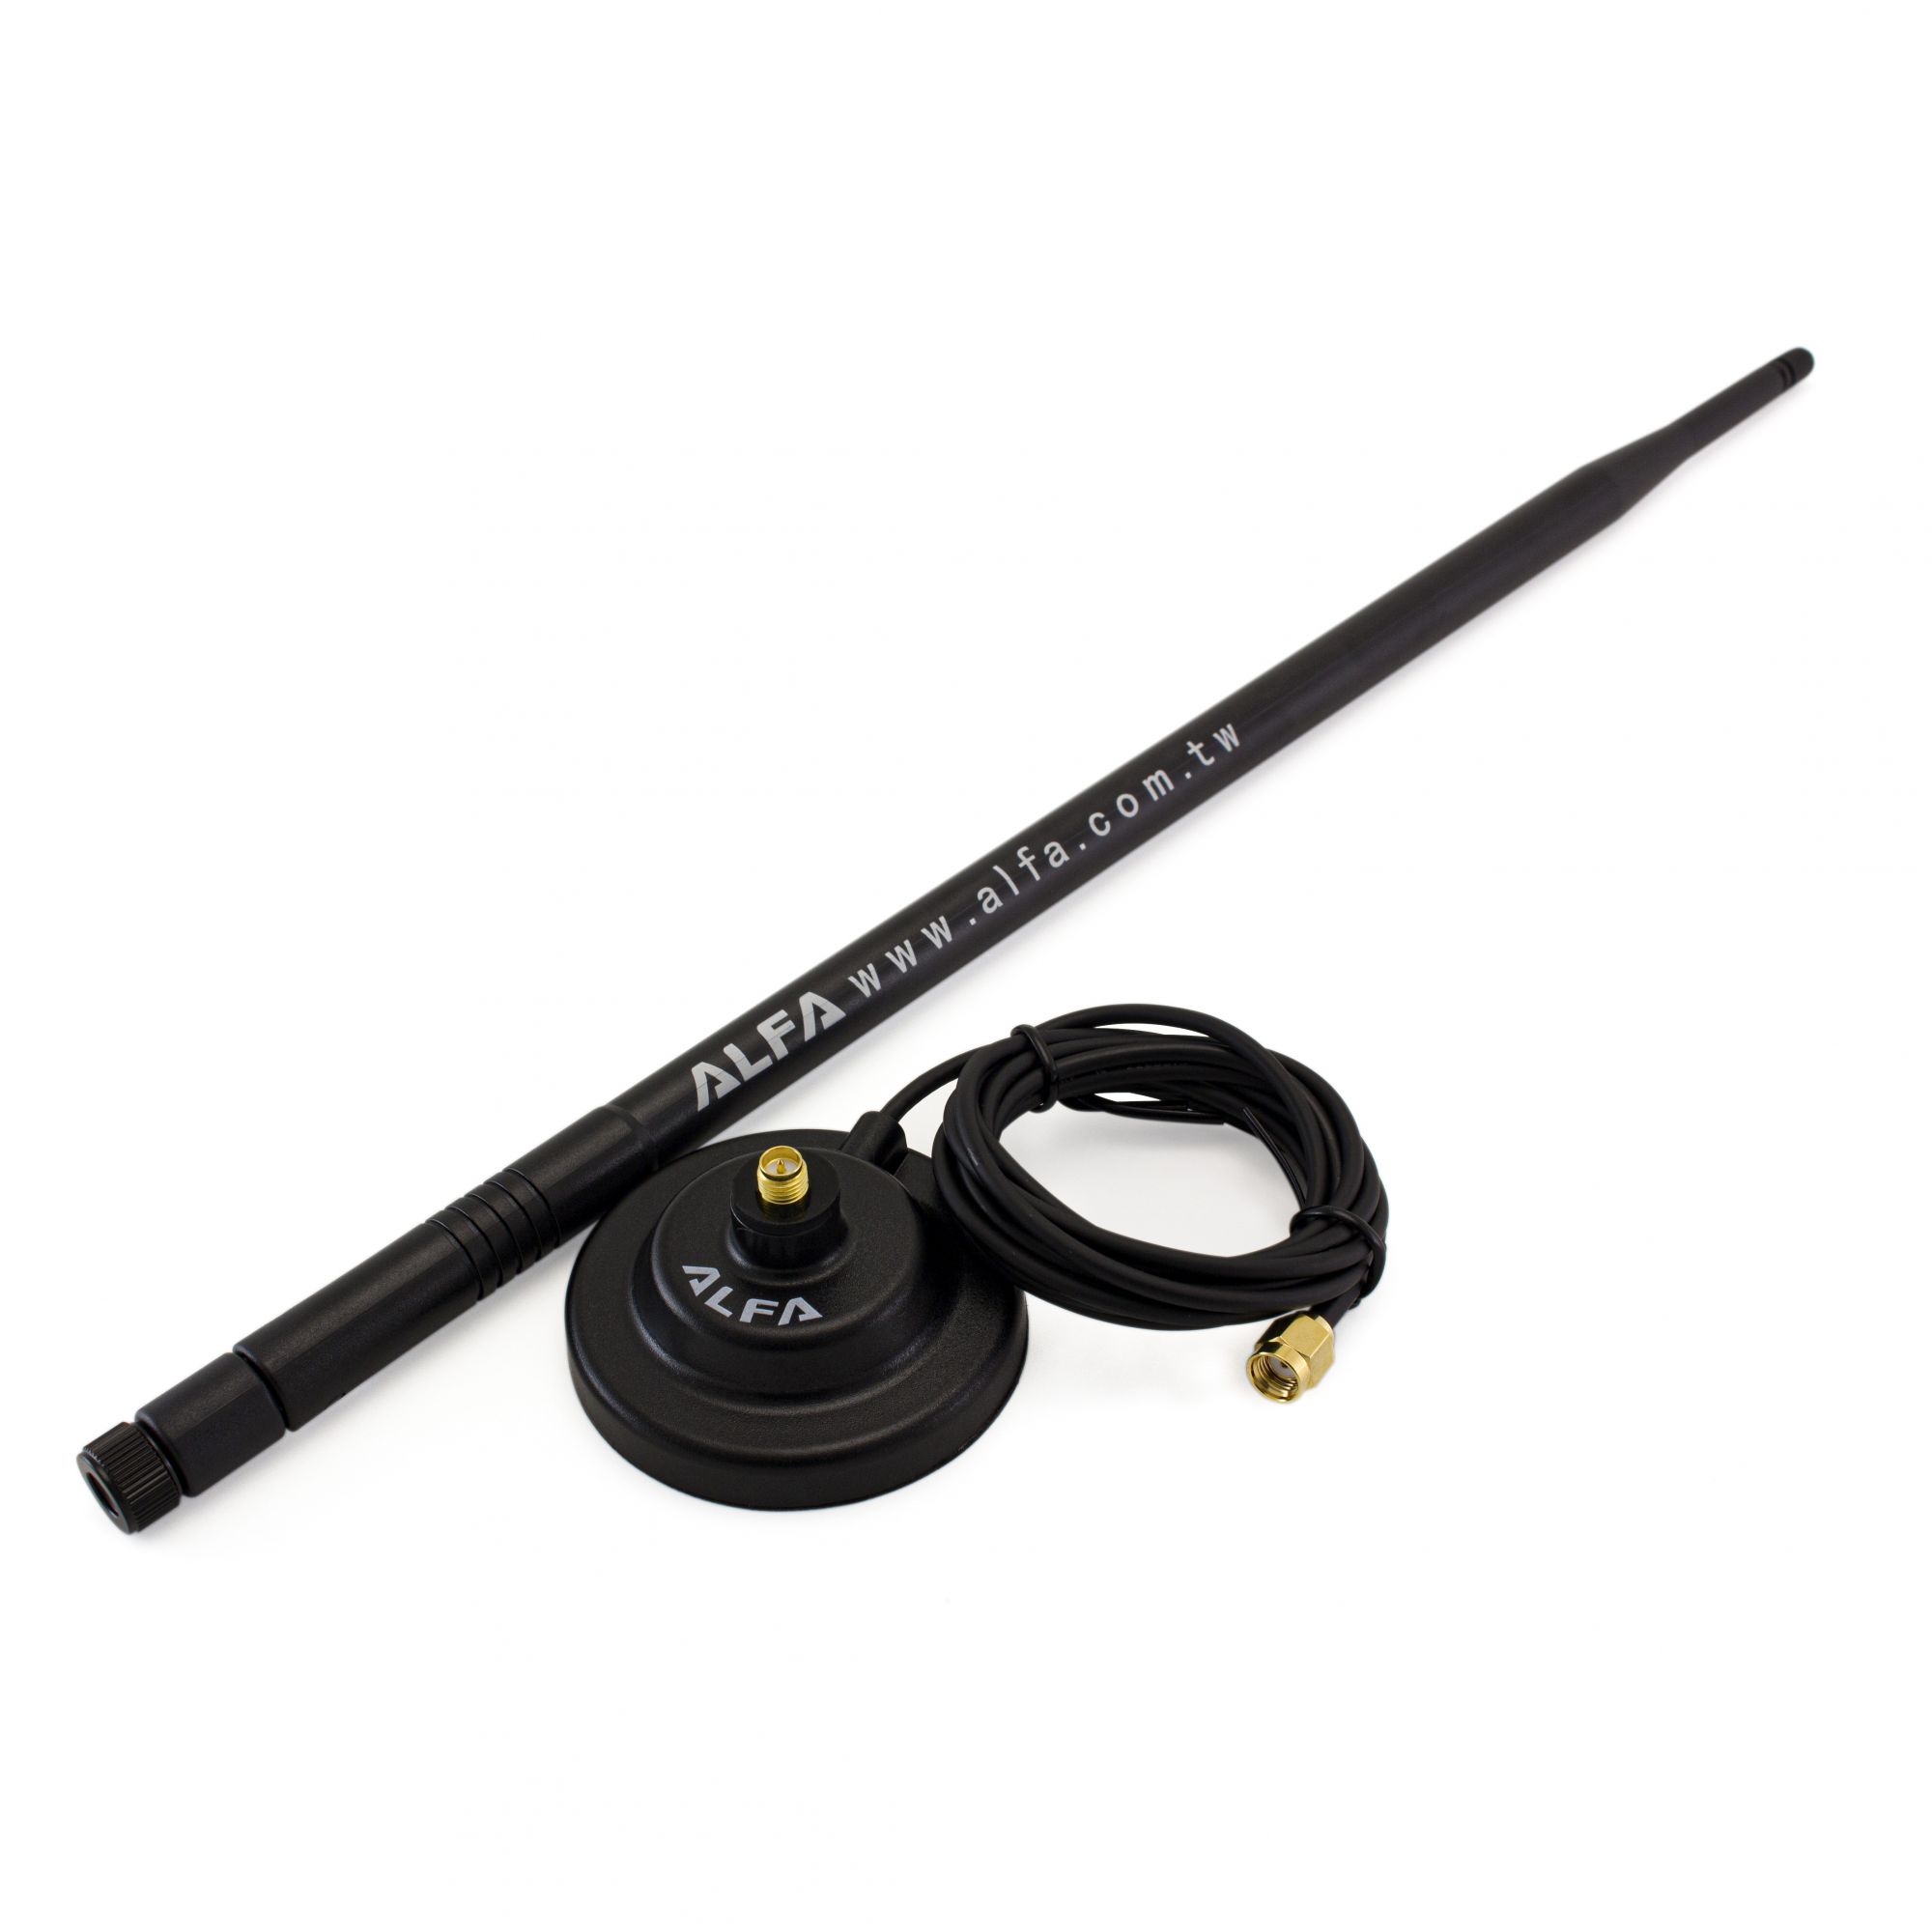 Alfa 2.4GHz Dipole Antenna 9dBi with Magnet Base